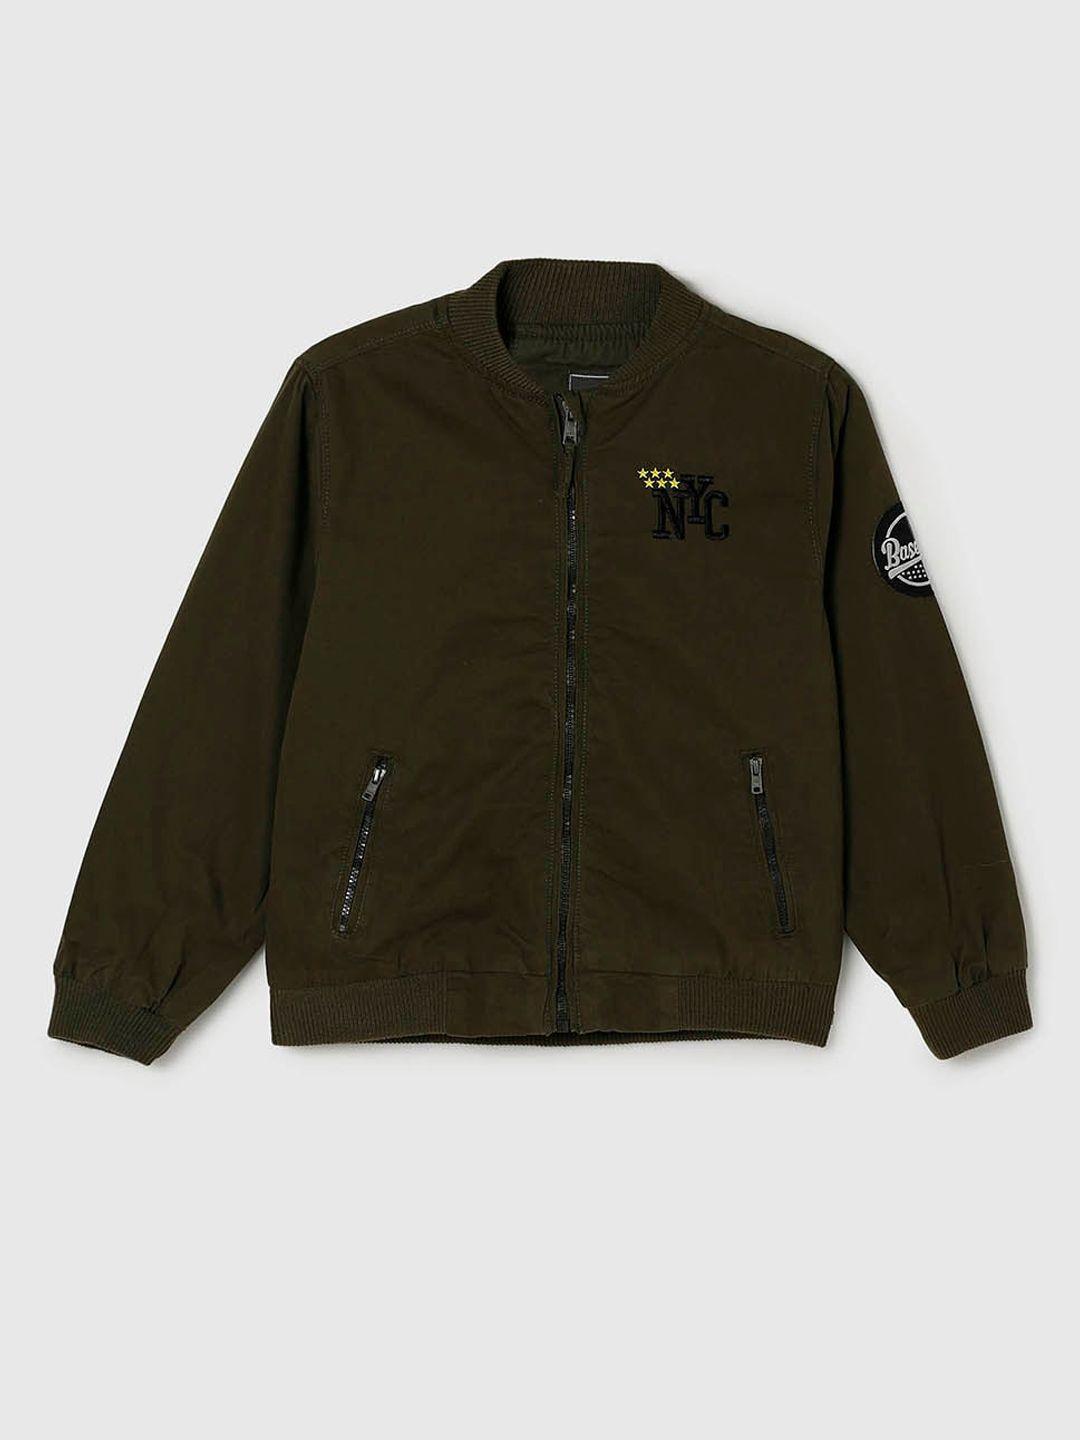 max boys olive green solid cotton bomber jacket